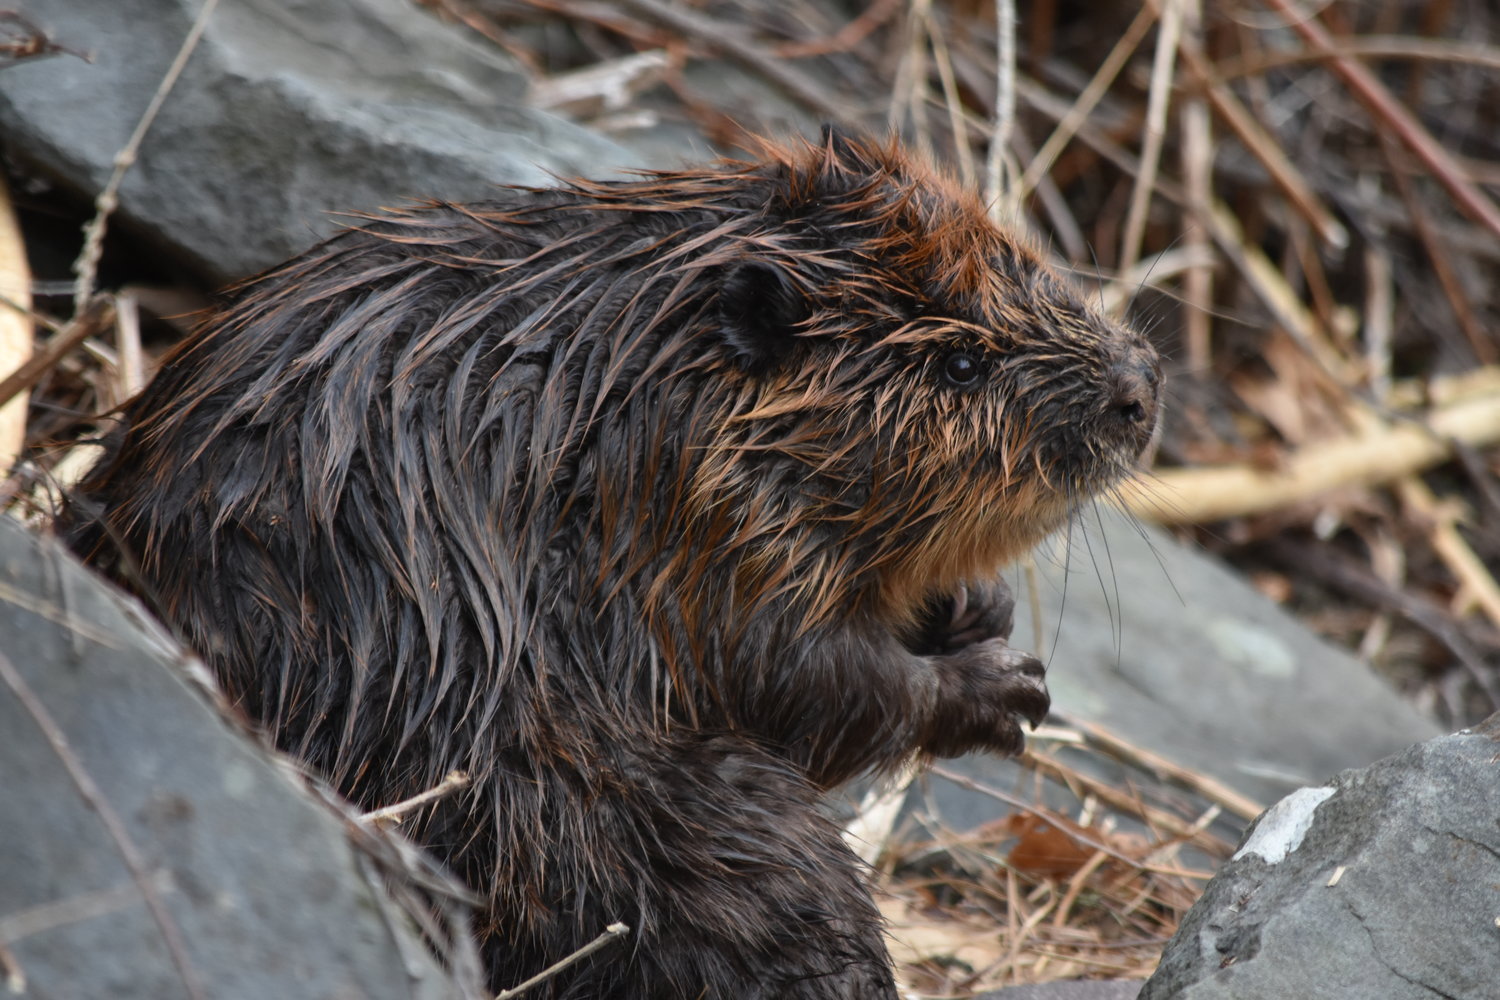 Adult beavers average 40 to 60 pounds and typically grow up to 40 inches in length. Their stubby bodies, glossy brown coats and paddle-shaped tails make this mammal easily identifiable in the Upper Delaware River region.